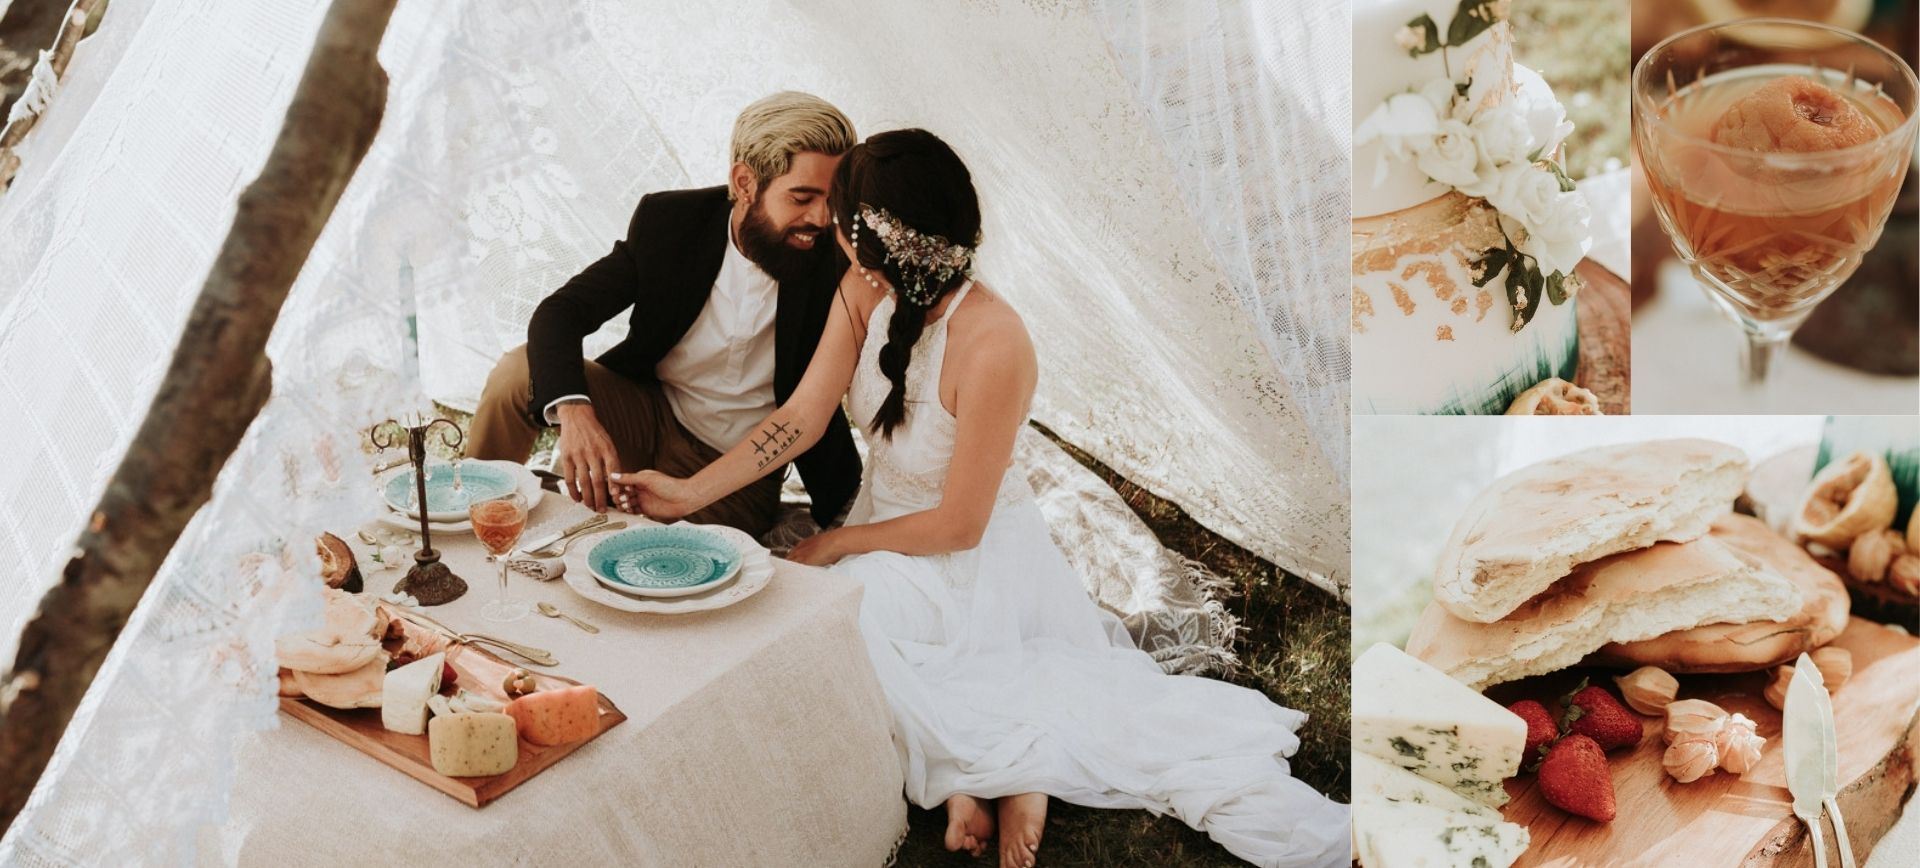 Glamping wedding in Chile - bride and groom in boho tent